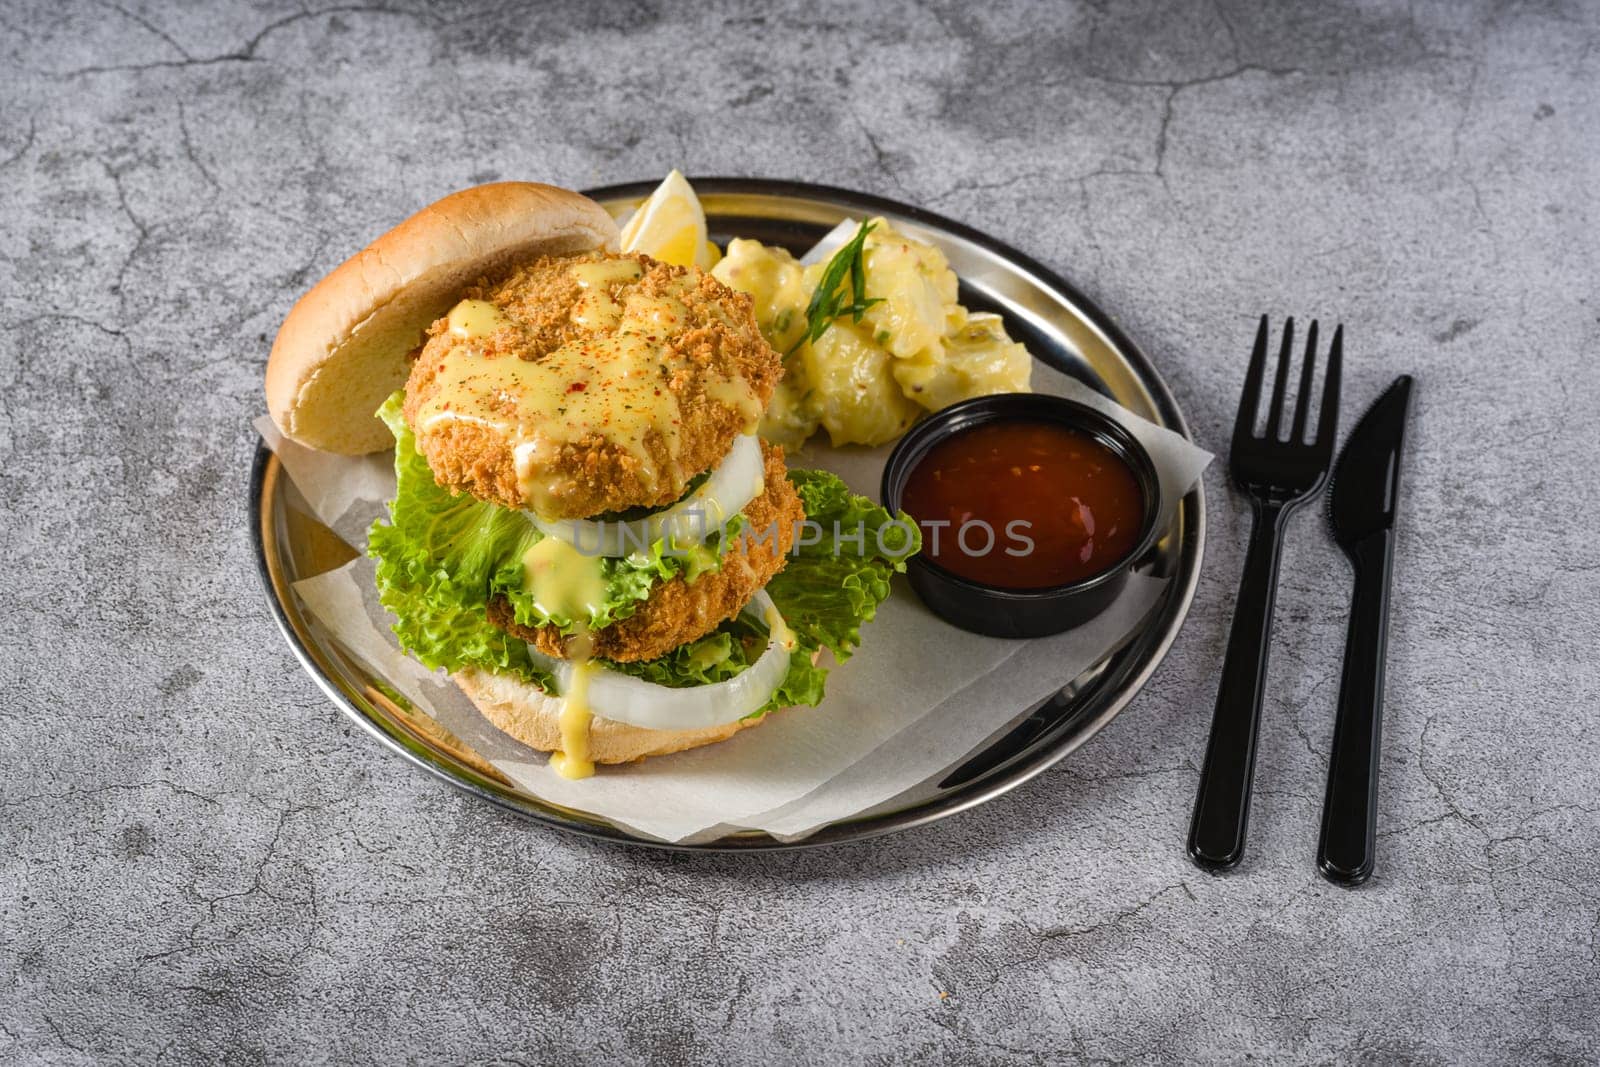 Double fish burger with potato salad on a metal plate by Sonat